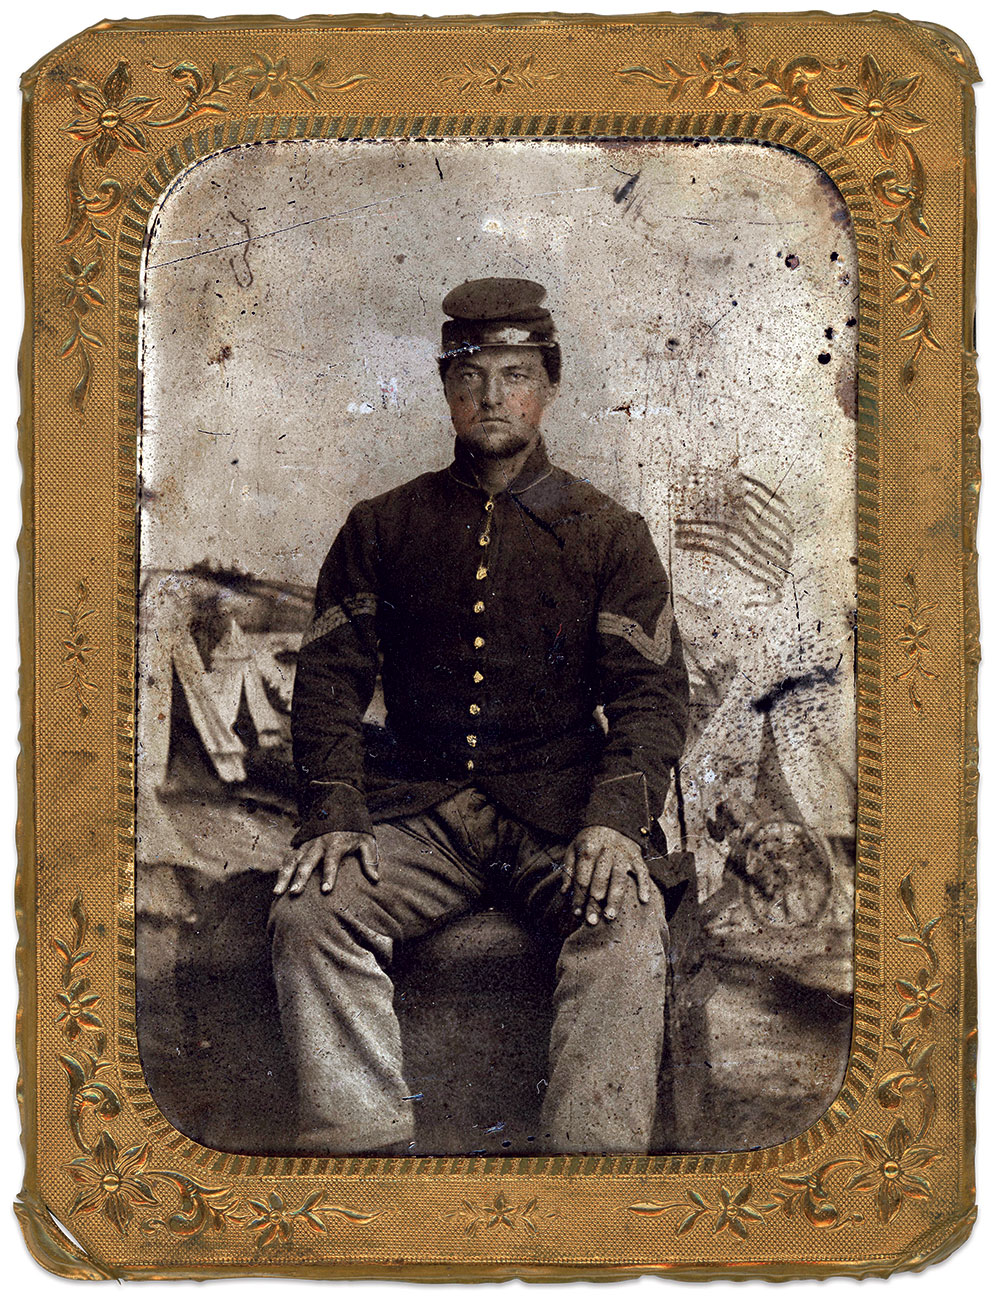 Enoch C. Dow. Quarter-plate tintype by an unidentified photographer.